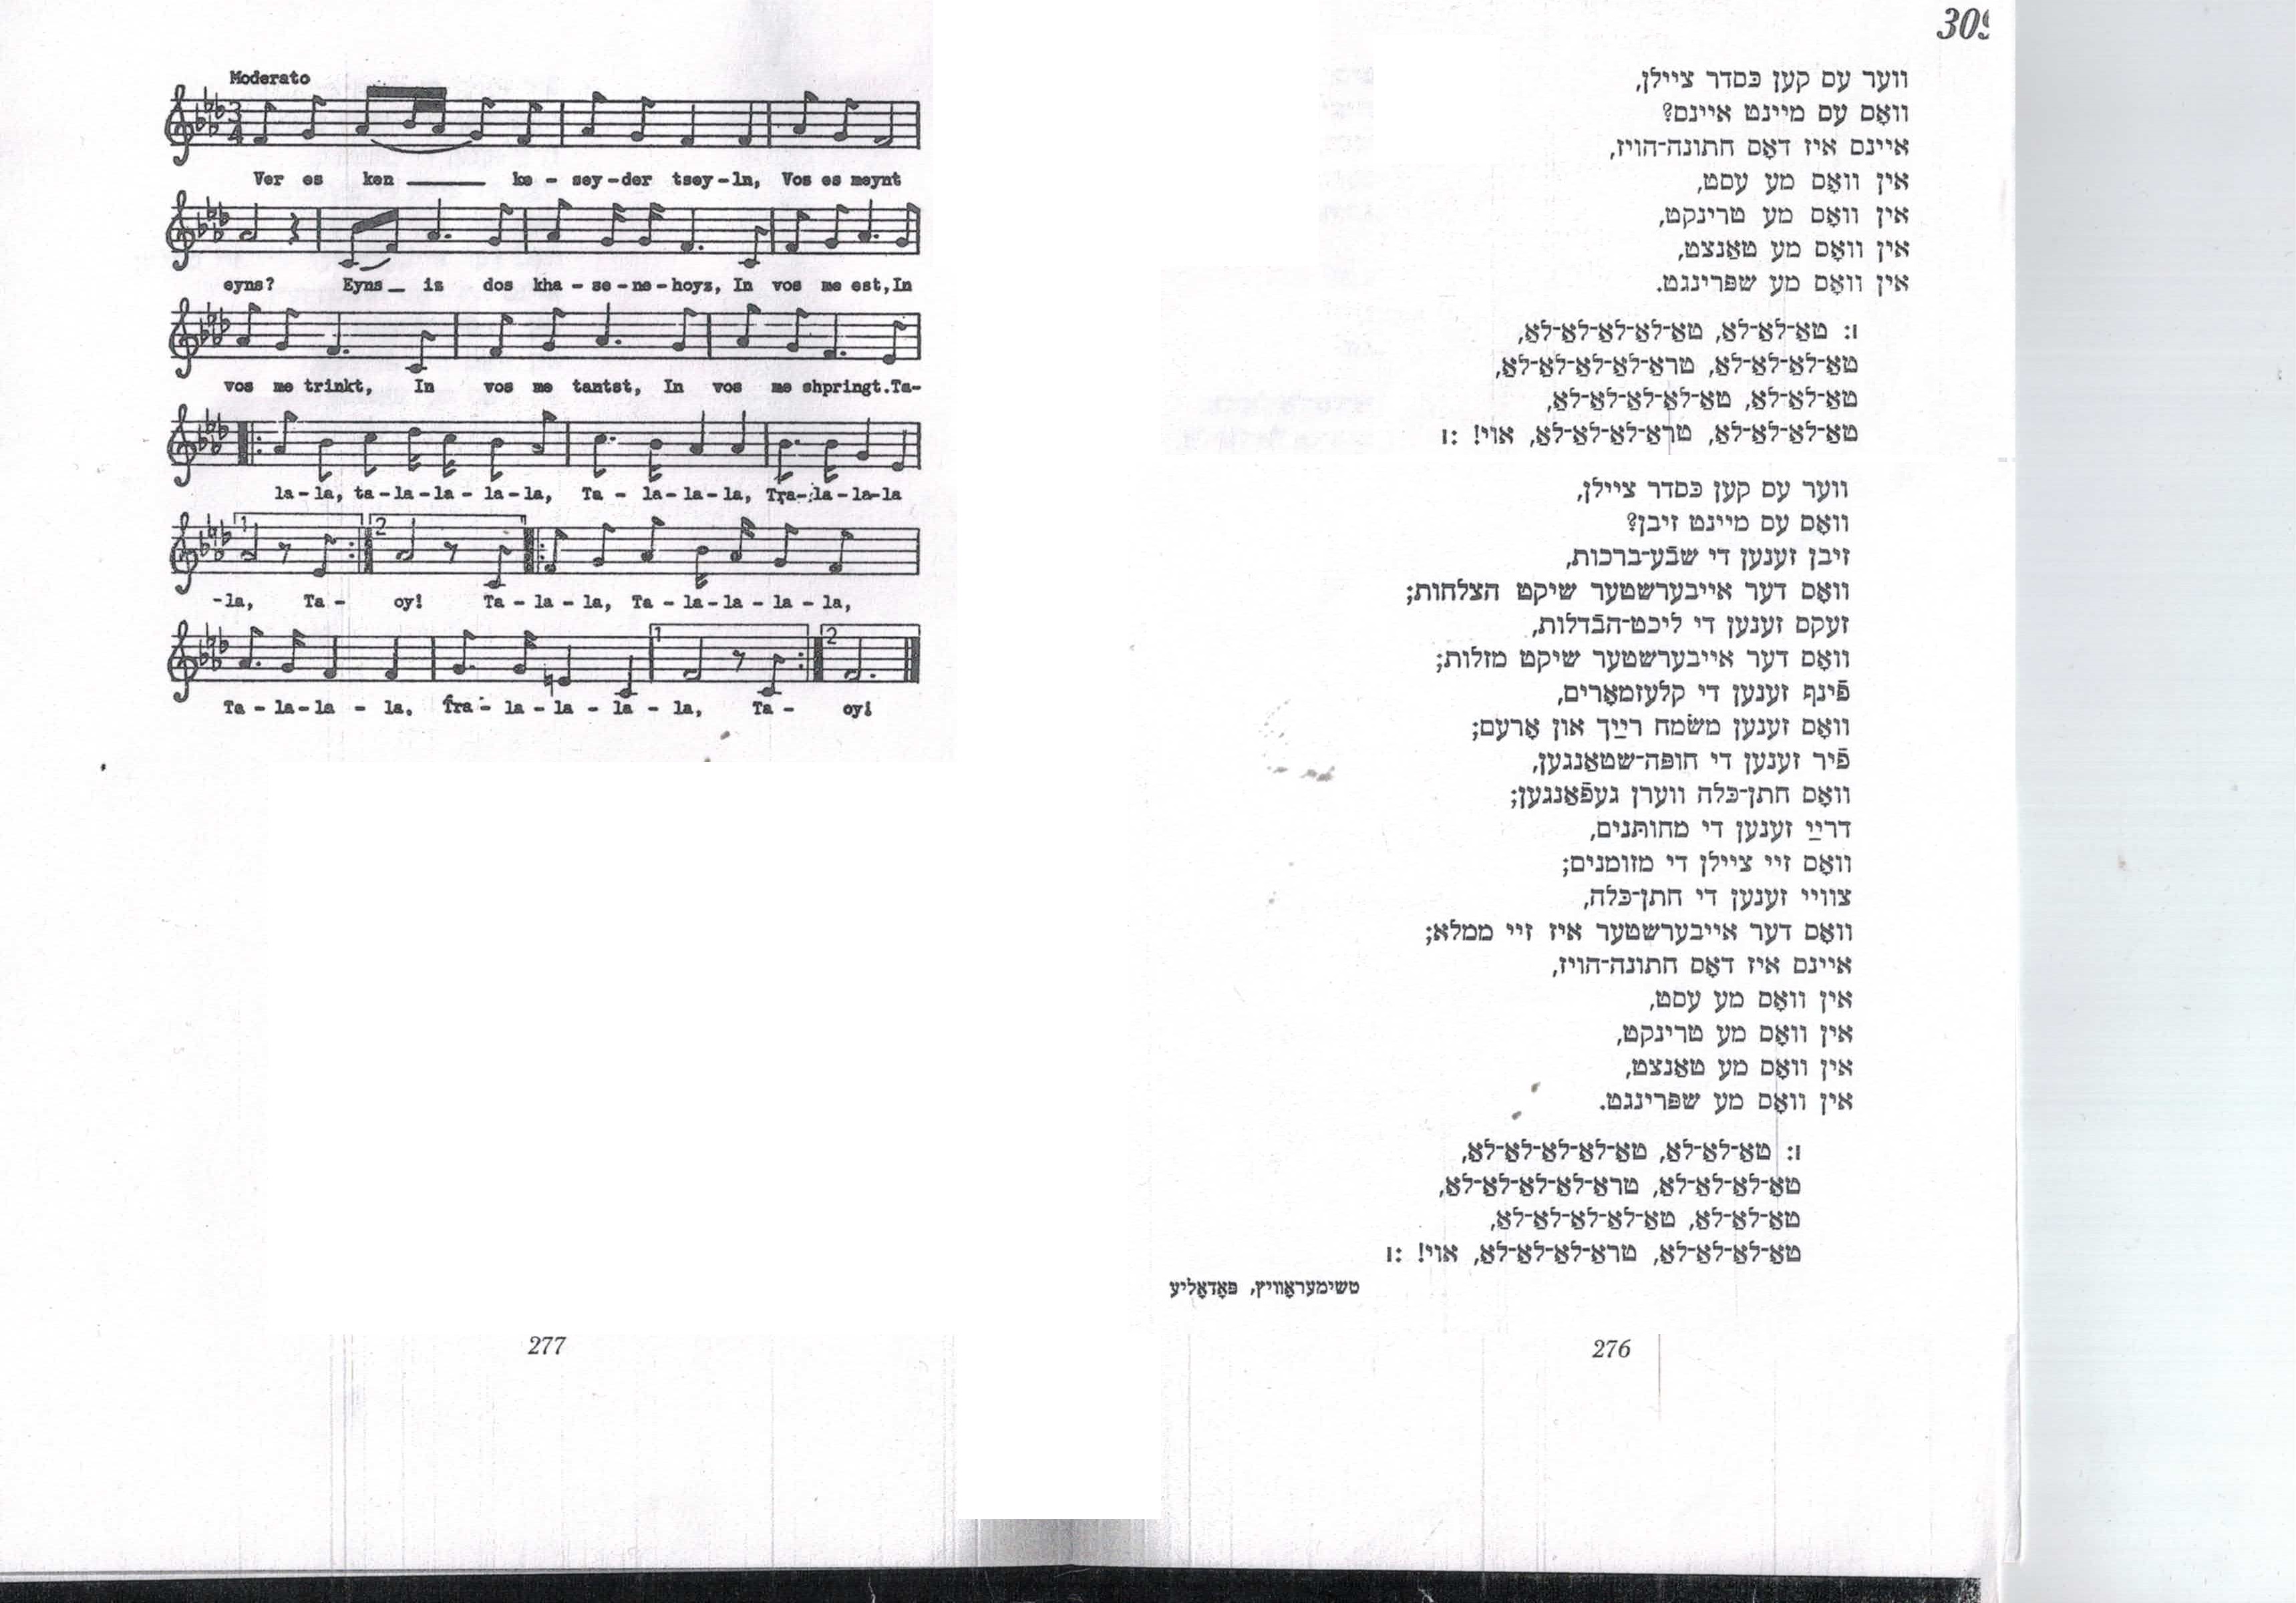 Notation and 1st and 7th verses to the wedding song based on "Ehad mi yodea" found in I.L. Cahan's 1957 collection.  Attachments